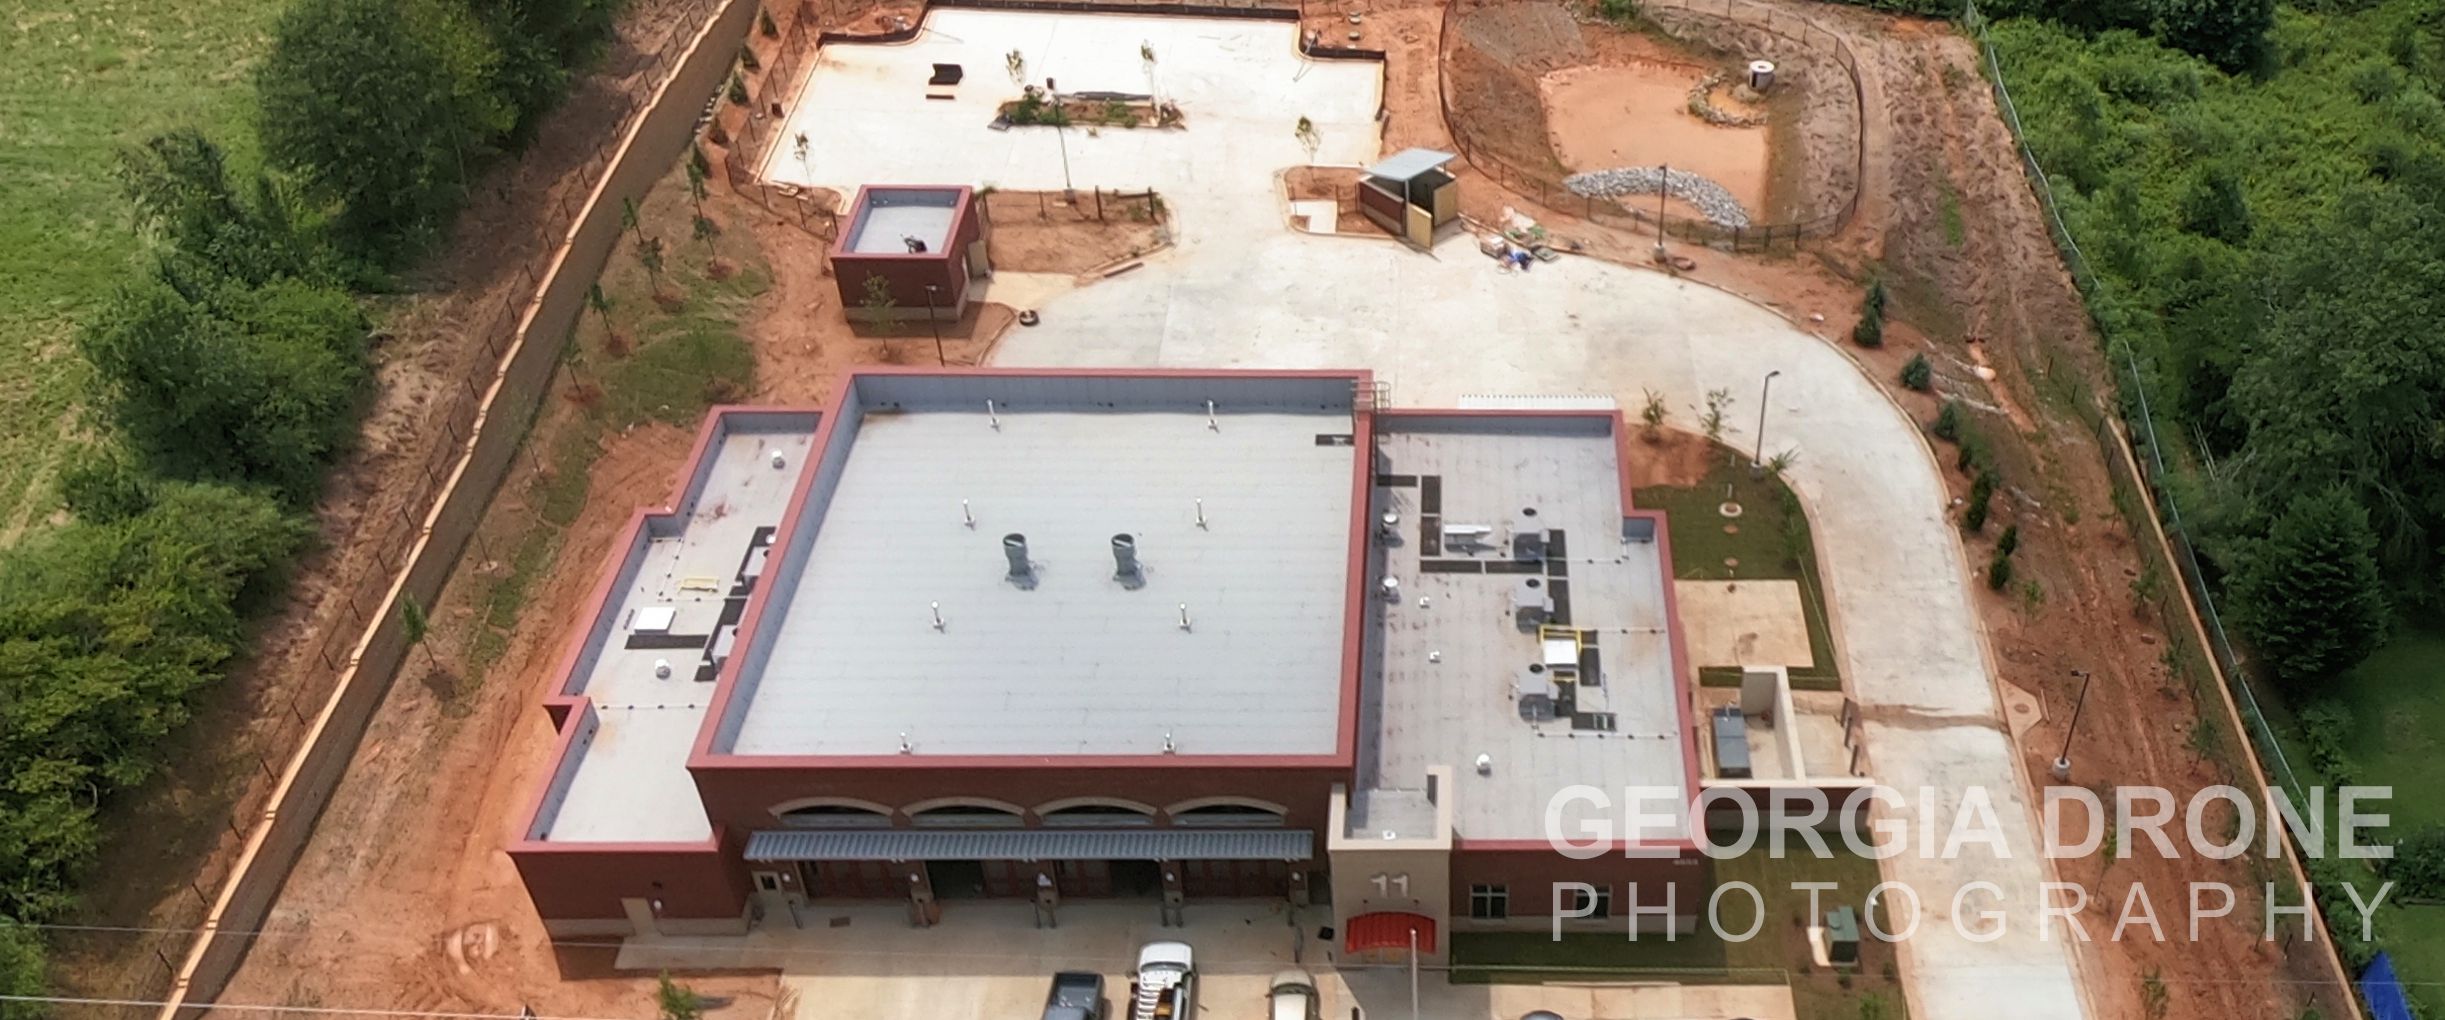 Drone photography of construction of the Forsyth County fire station number 11 on Pittman Road